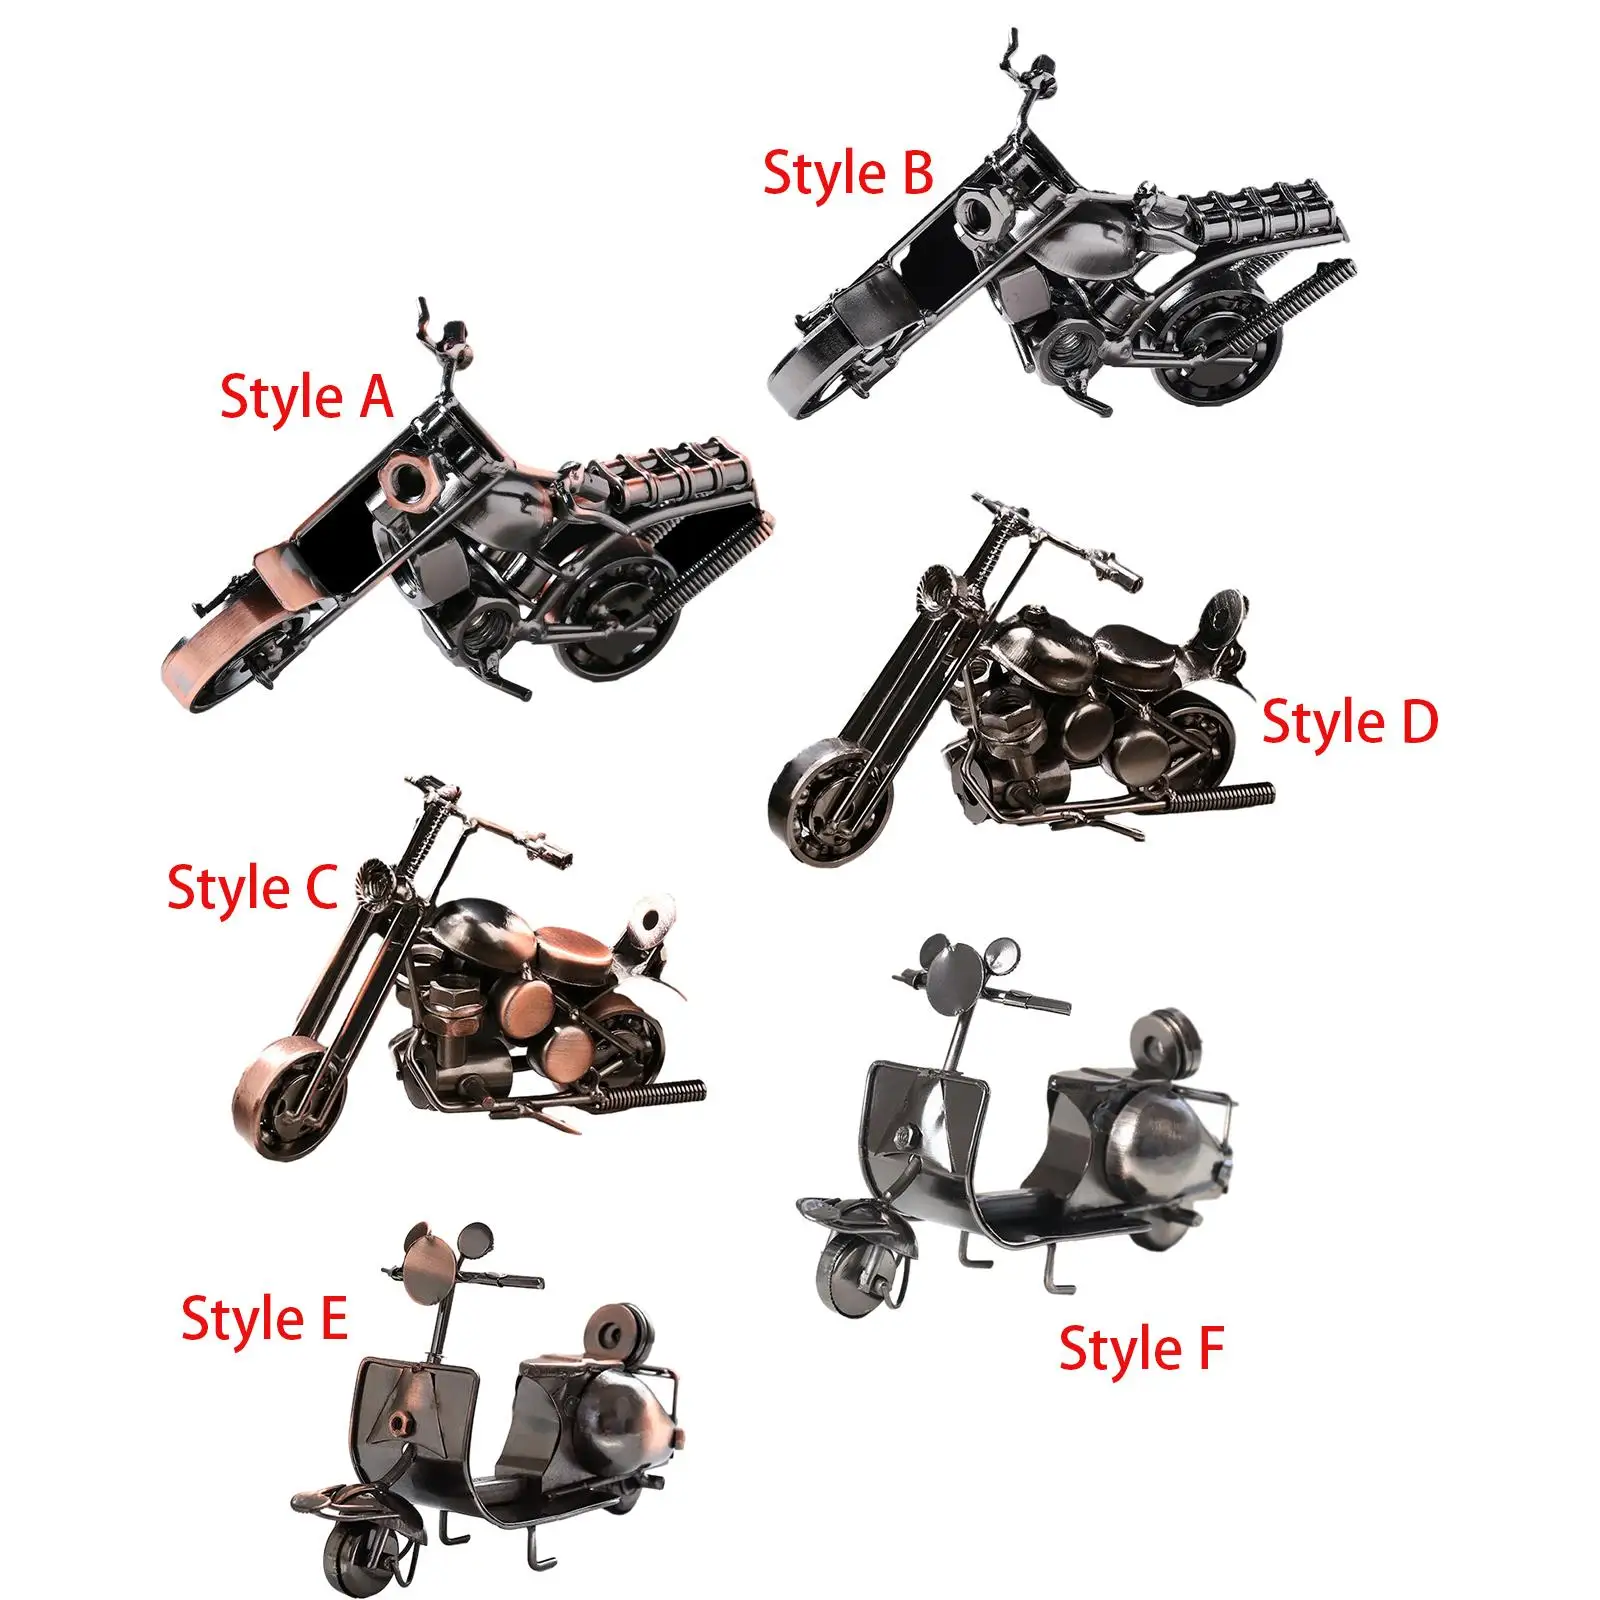 Metal Motorcycle Model Motorcycle Sculpture Iron Classic Decoration Collection for Desktop Motorcycle Lovers Dad Boys